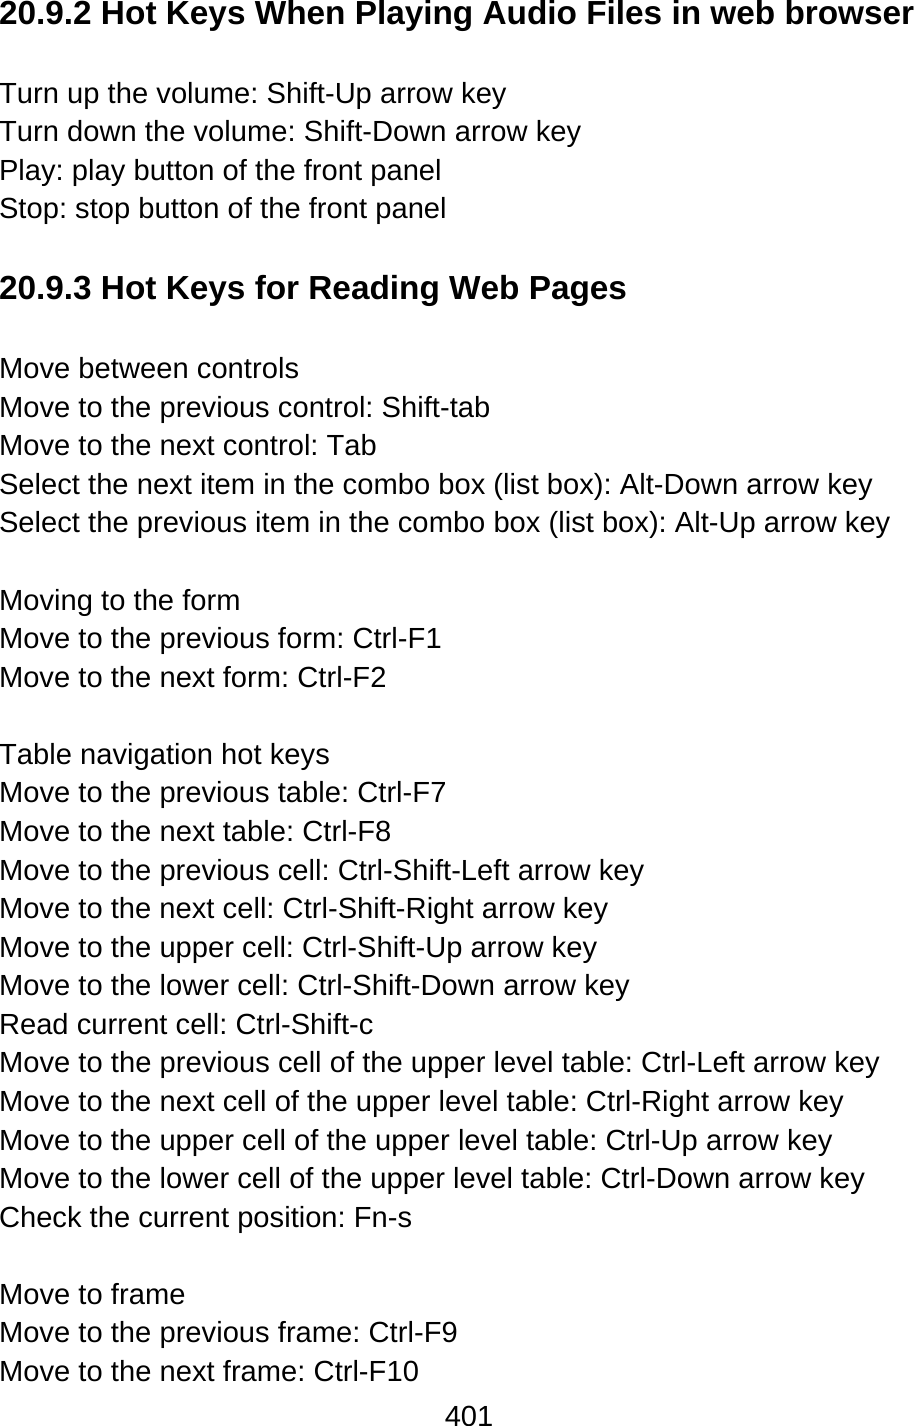 401  20.9.2 Hot Keys When Playing Audio Files in web browser  Turn up the volume: Shift-Up arrow key Turn down the volume: Shift-Down arrow key Play: play button of the front panel Stop: stop button of the front panel  20.9.3 Hot Keys for Reading Web Pages  Move between controls Move to the previous control: Shift-tab   Move to the next control: Tab Select the next item in the combo box (list box): Alt-Down arrow key Select the previous item in the combo box (list box): Alt-Up arrow key  Moving to the form Move to the previous form: Ctrl-F1 Move to the next form: Ctrl-F2  Table navigation hot keys Move to the previous table: Ctrl-F7 Move to the next table: Ctrl-F8 Move to the previous cell: Ctrl-Shift-Left arrow key Move to the next cell: Ctrl-Shift-Right arrow key Move to the upper cell: Ctrl-Shift-Up arrow key Move to the lower cell: Ctrl-Shift-Down arrow key Read current cell: Ctrl-Shift-c Move to the previous cell of the upper level table: Ctrl-Left arrow key Move to the next cell of the upper level table: Ctrl-Right arrow key Move to the upper cell of the upper level table: Ctrl-Up arrow key Move to the lower cell of the upper level table: Ctrl-Down arrow key Check the current position: Fn-s  Move to frame Move to the previous frame: Ctrl-F9 Move to the next frame: Ctrl-F10 